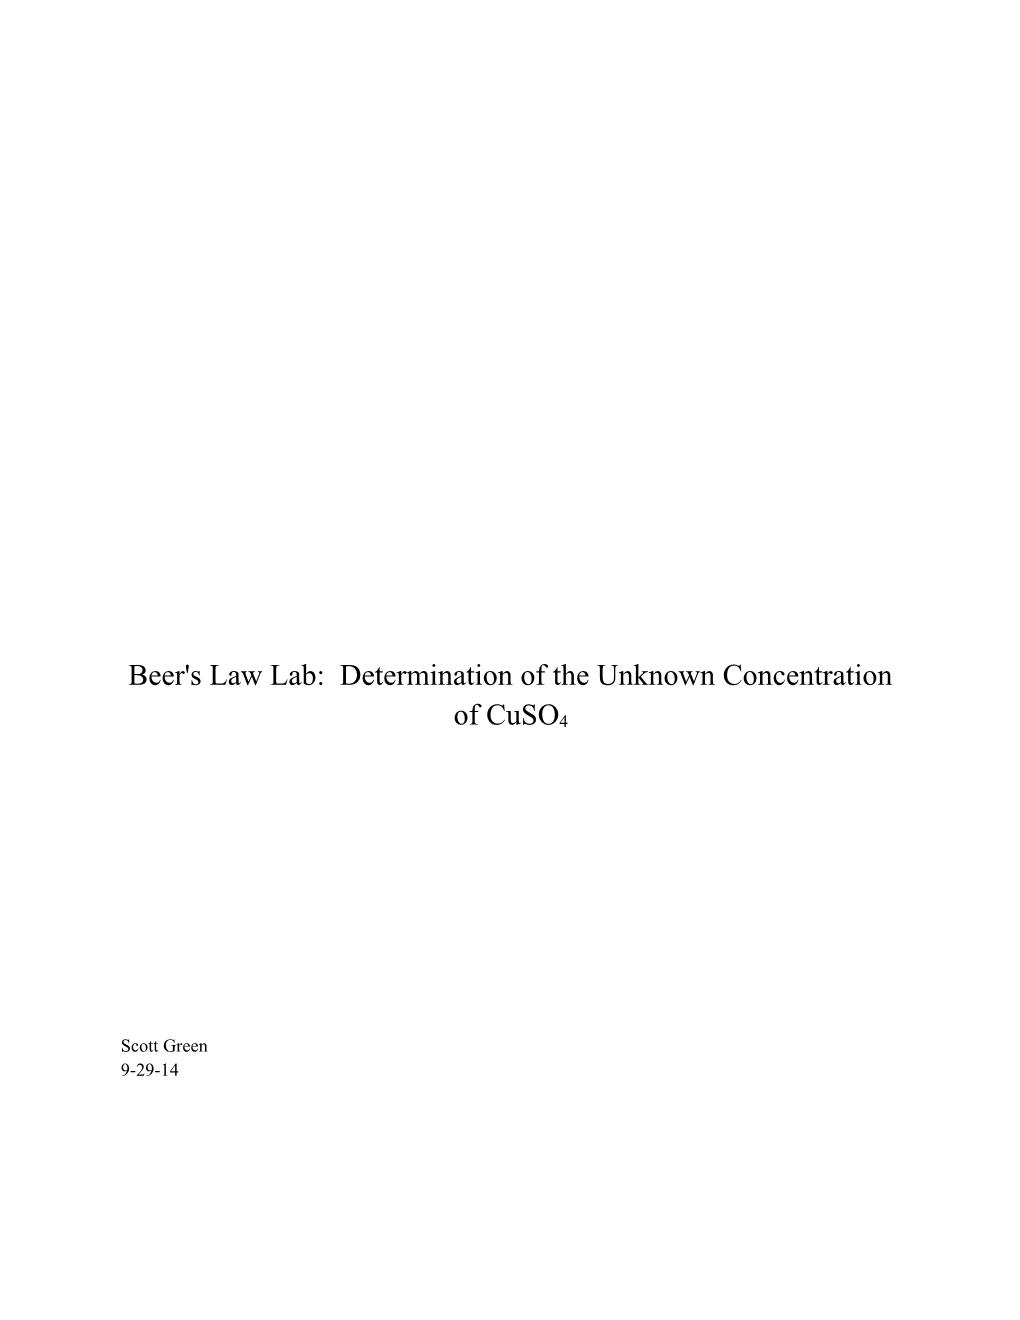 Beer's Law Lab: Determination of the Unknown Concentration of Cuso4